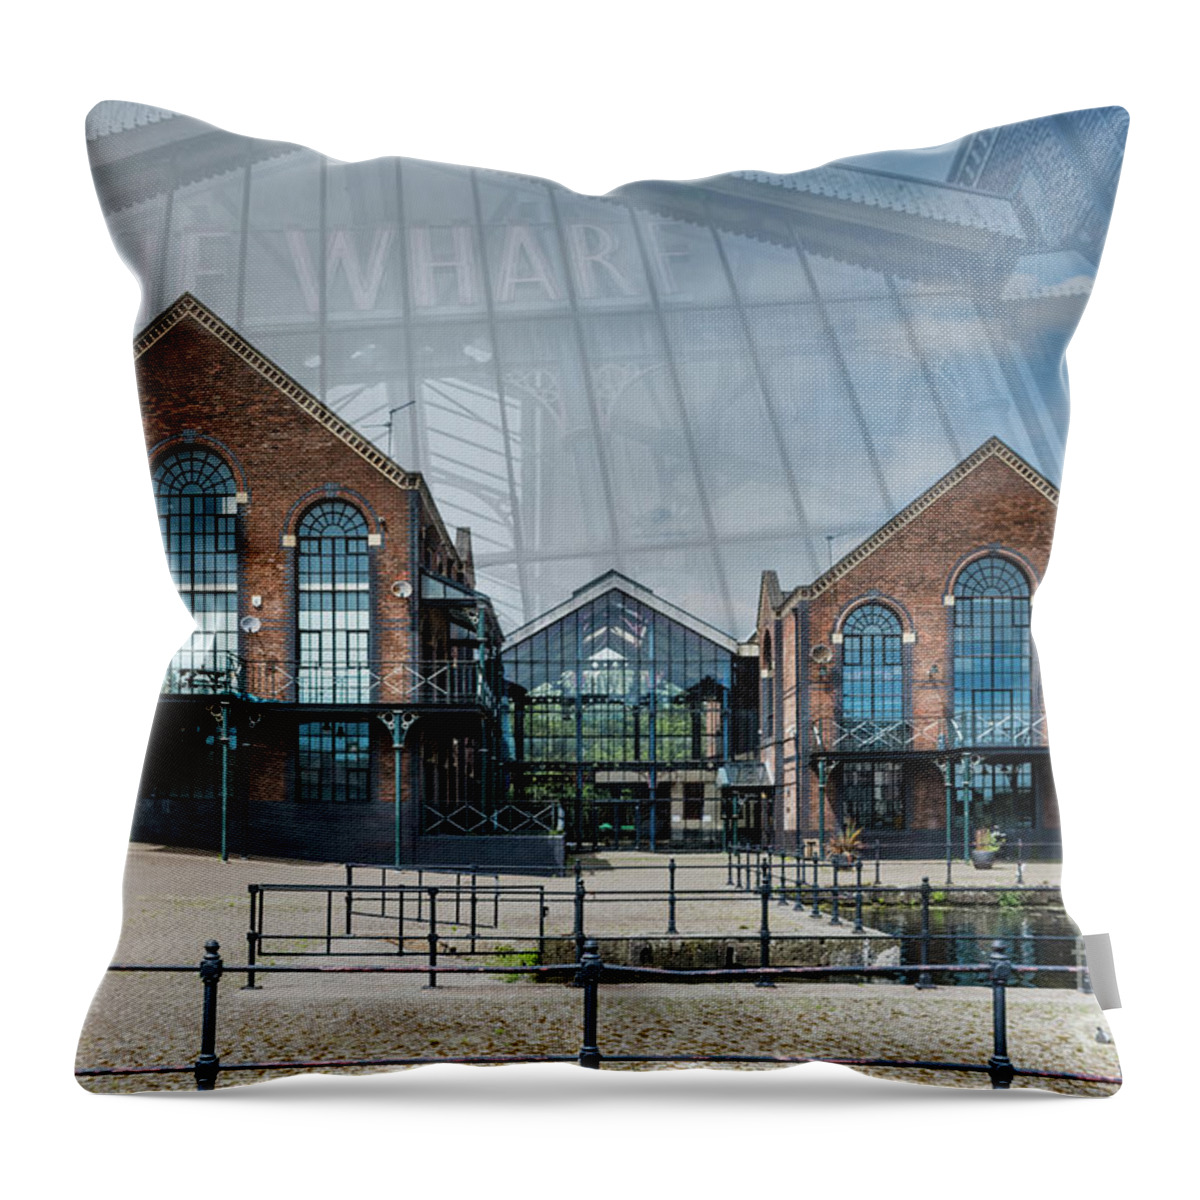 The Wharf Throw Pillow featuring the photograph The Wharf Cardiff Bay by Steve Purnell